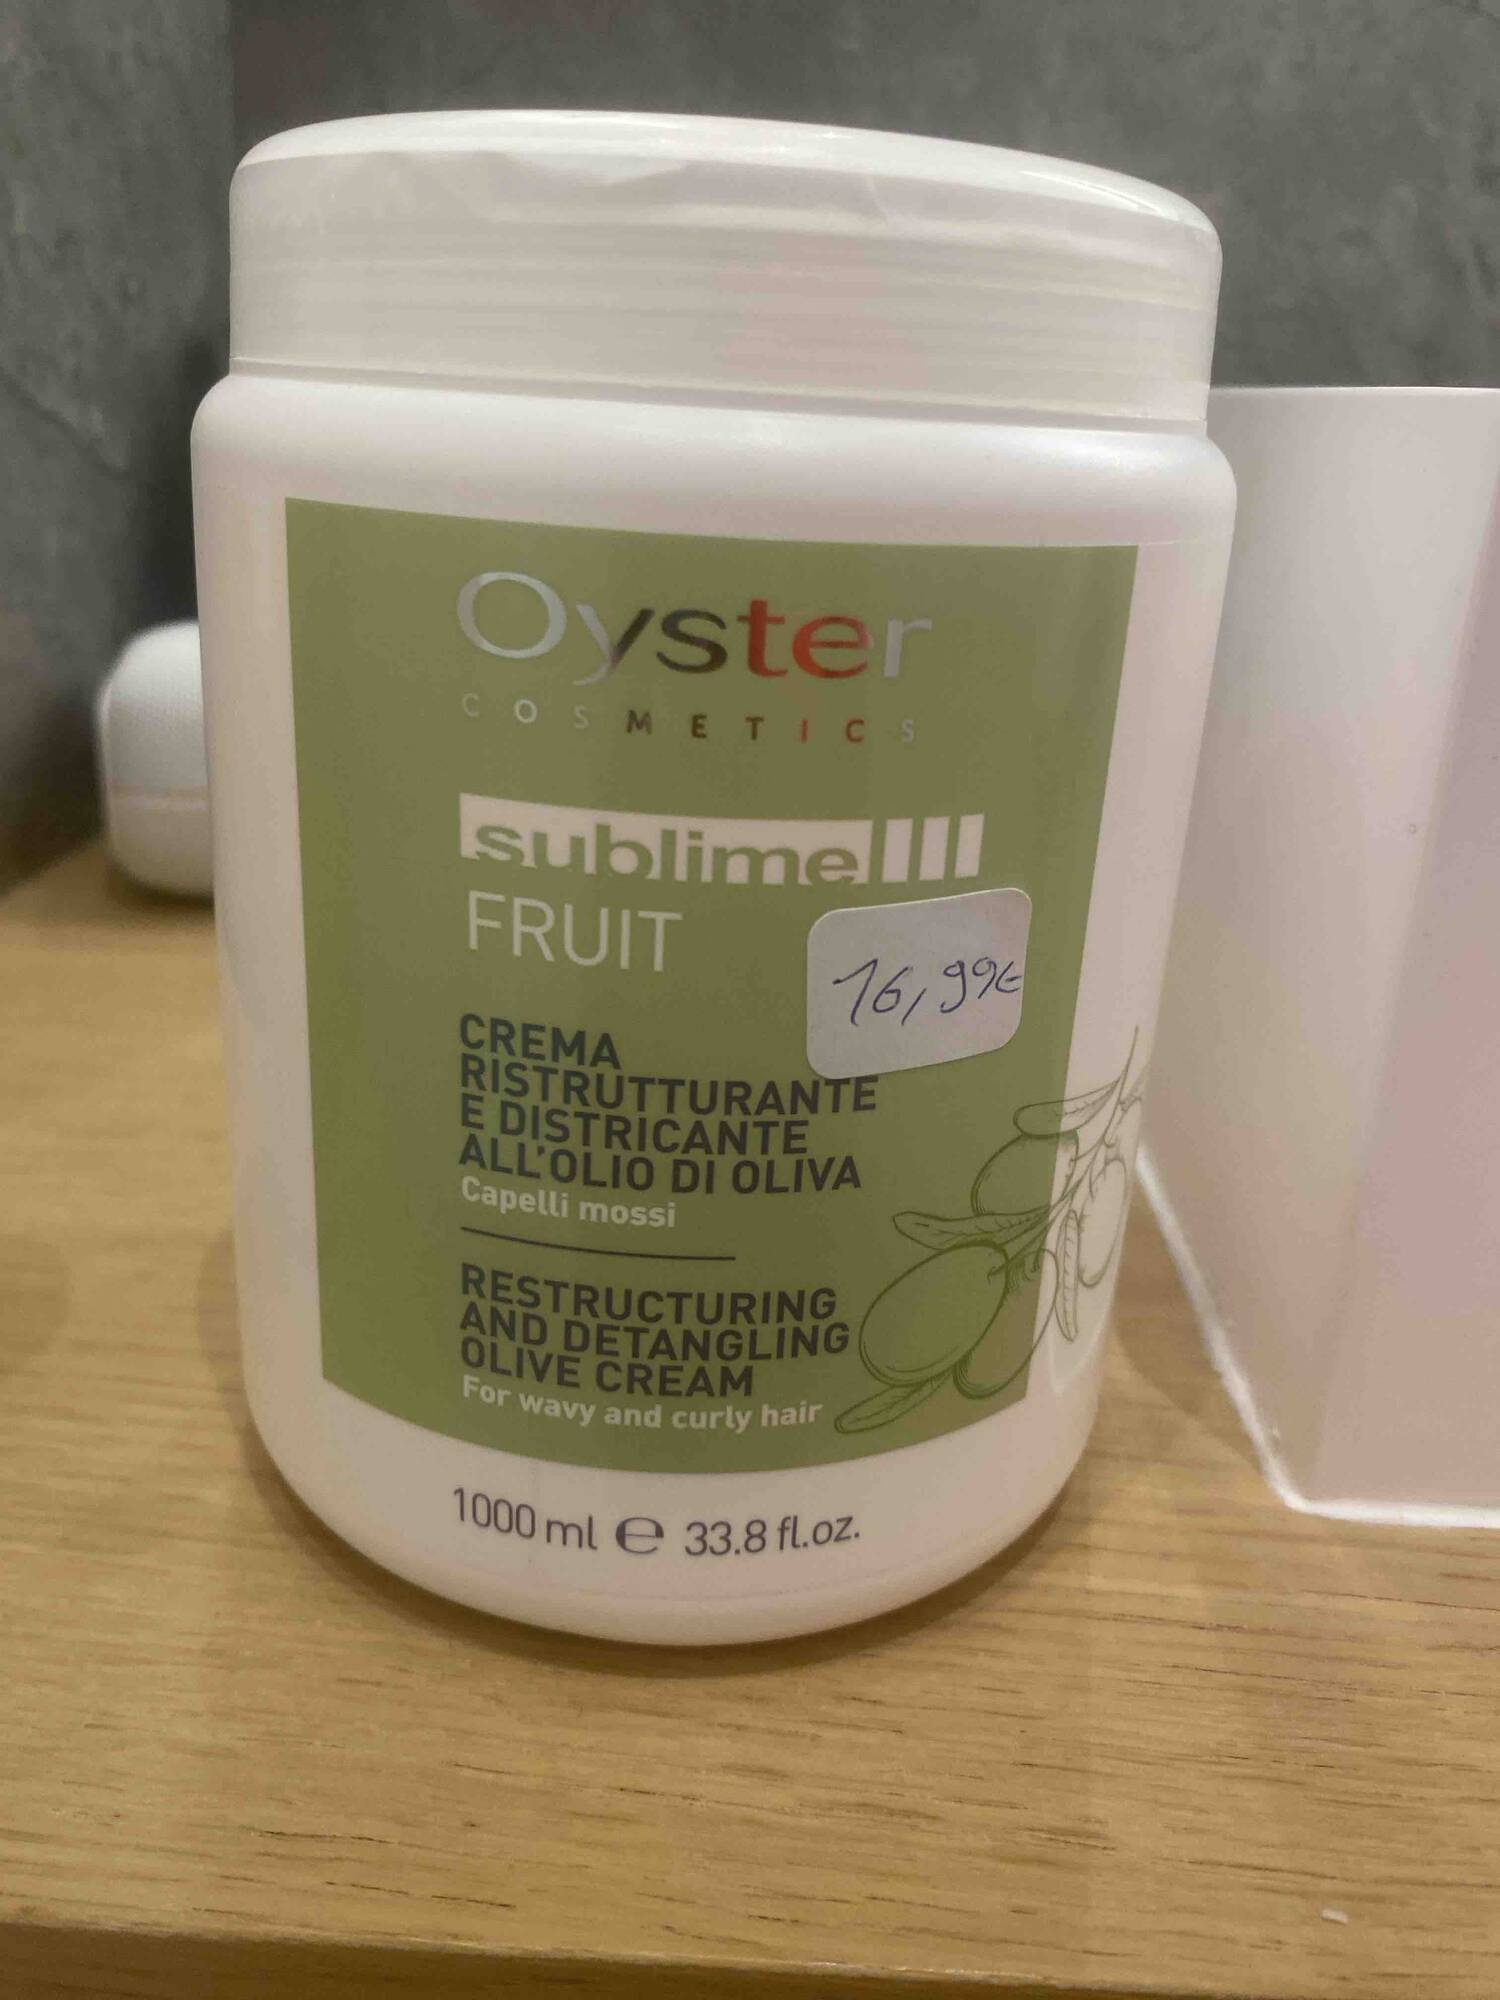 OYSTER COSMETICS - Sublime fruit - Restructuring and detangling olive cream